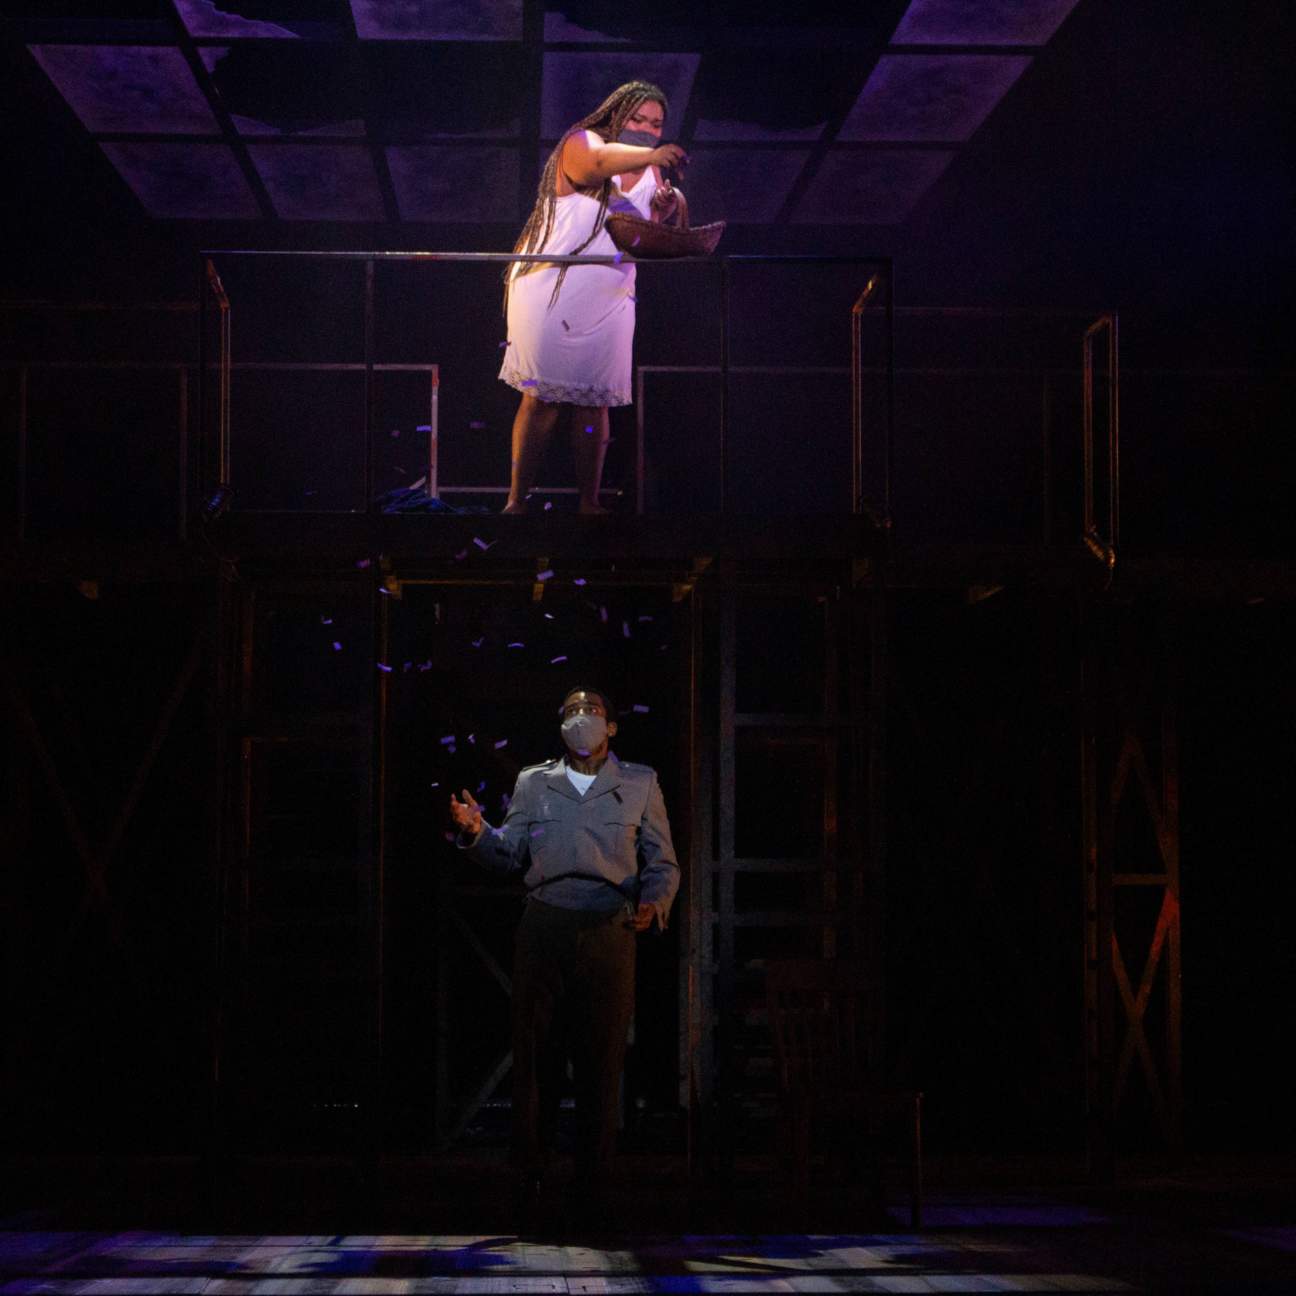 A young girl in her underclothes stands on a platform above a young man in a reformatory uniform. She holds a basket of purple petals and sings as she drops some of them on to him. He looks up at her in awe.